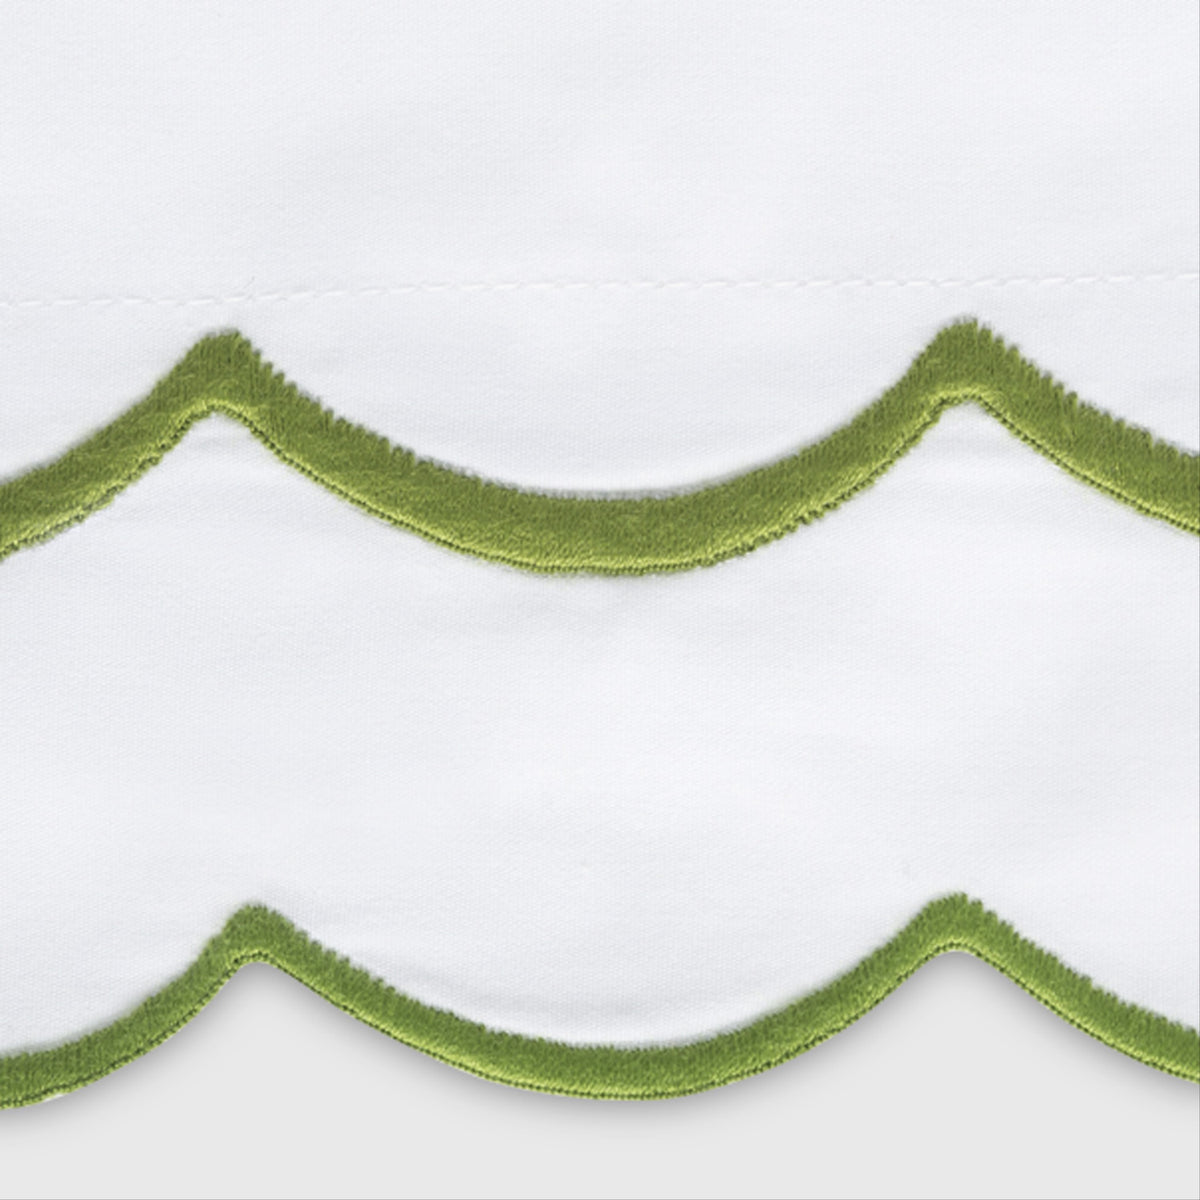 Swatch Sample of Matouk India Bedding in Grass Color